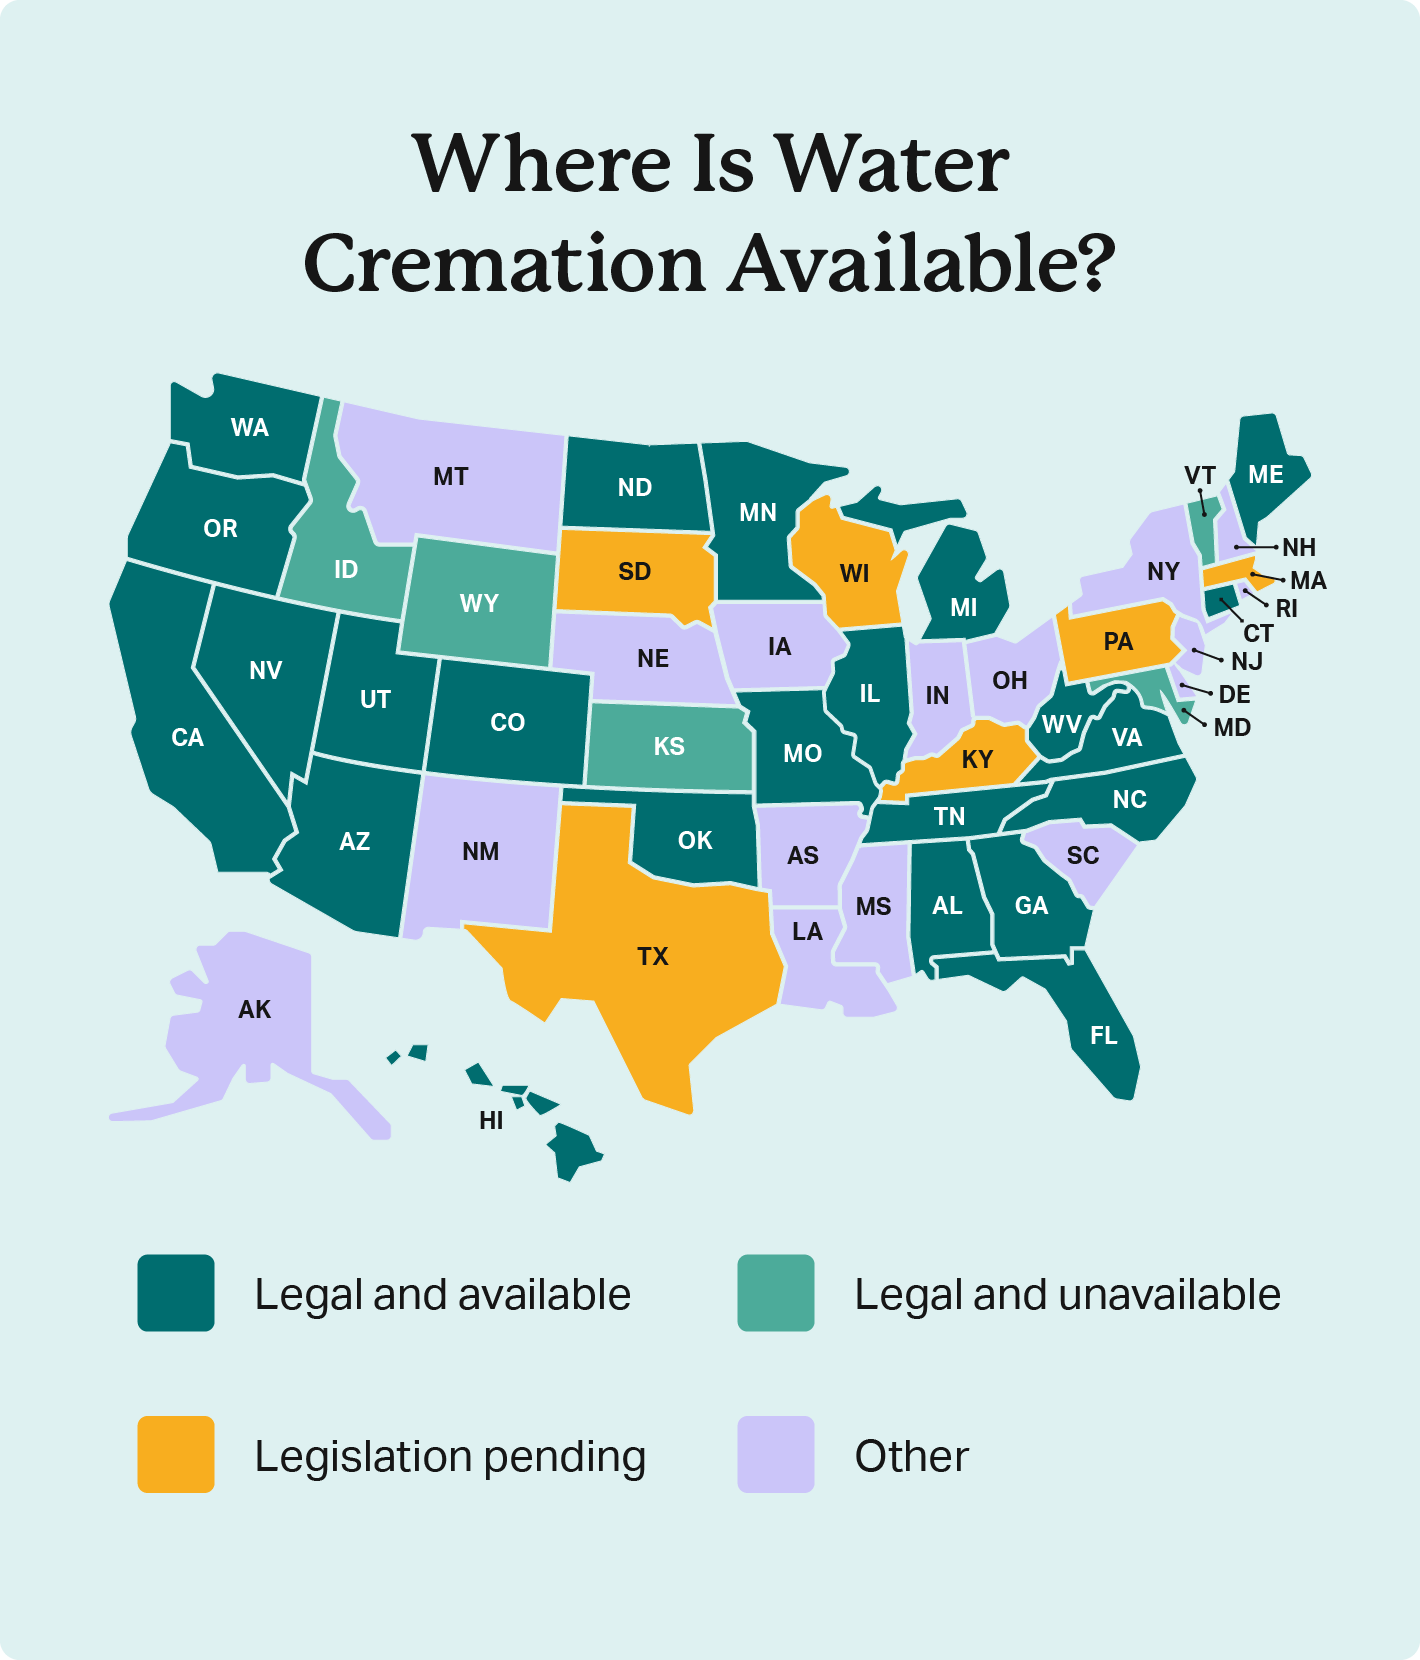 A color-coded U.S map indicates which states offer legal water cremation. 